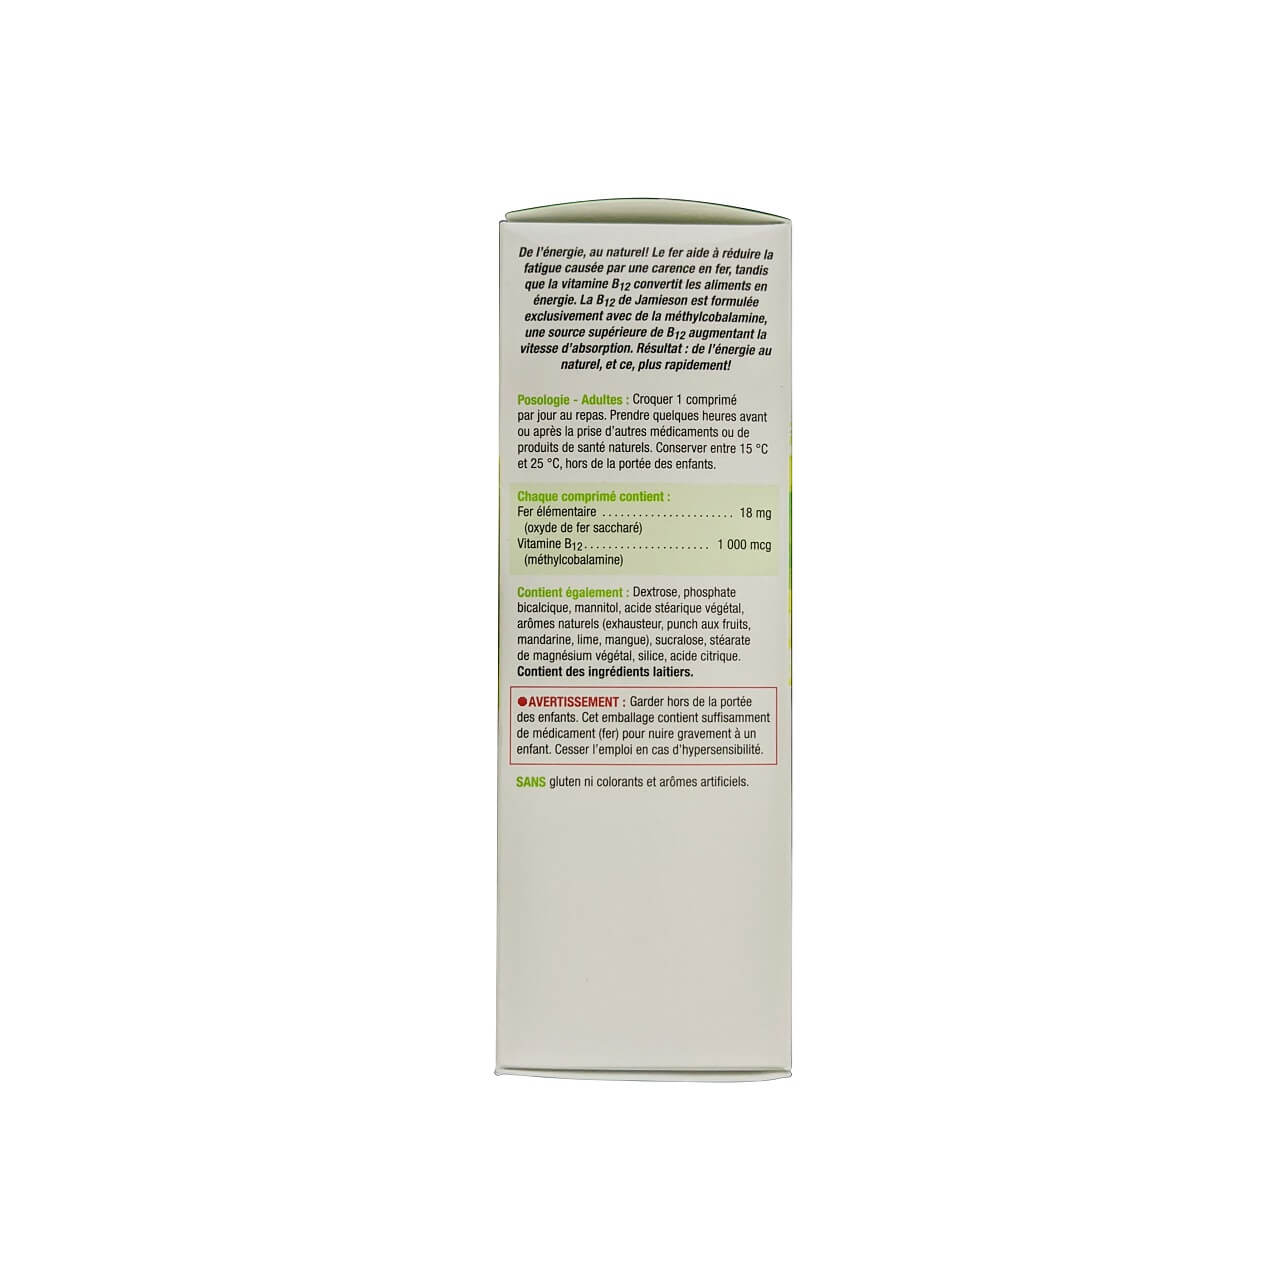 Description, directions, ingredients, warnings for Jamieson Iron Plus B12 Topical Mango Lime Flavour (45 chewables tablets) in French